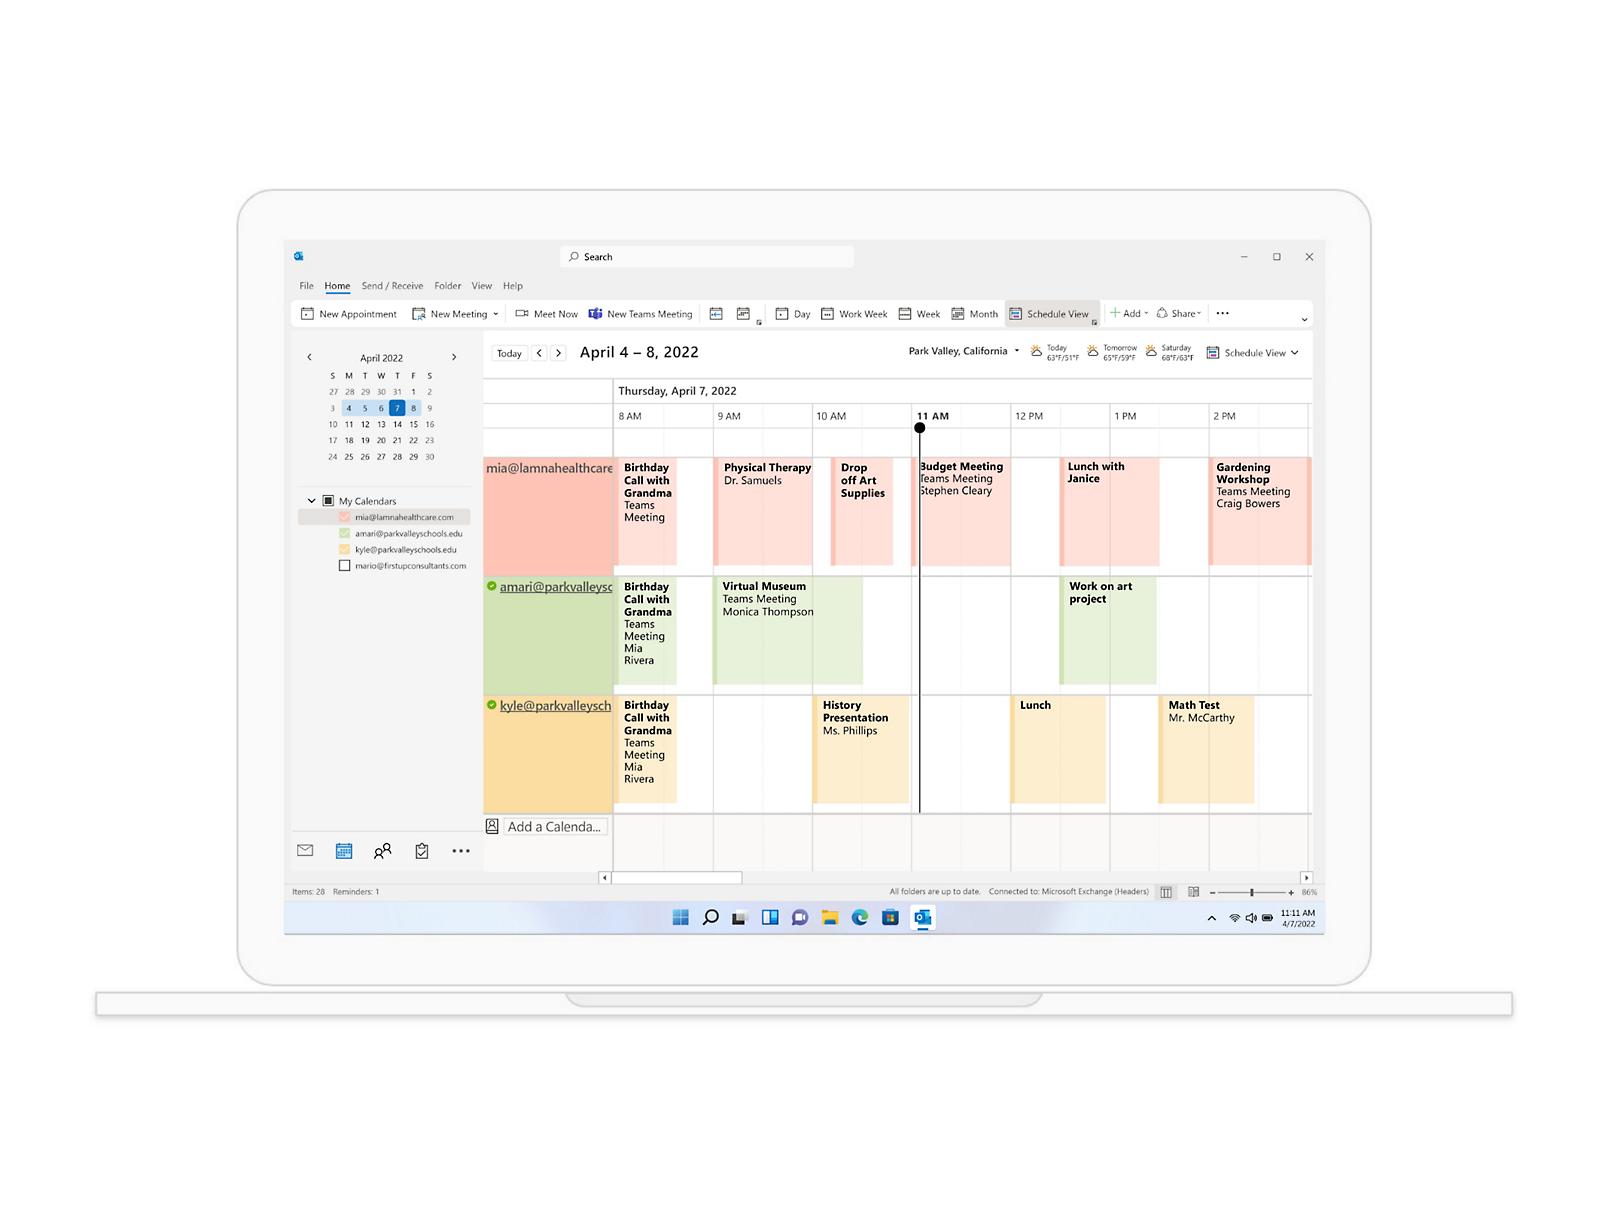 A calendar view in Outlook showing meetings and appointments for the week of March 29.- Microsoft 365